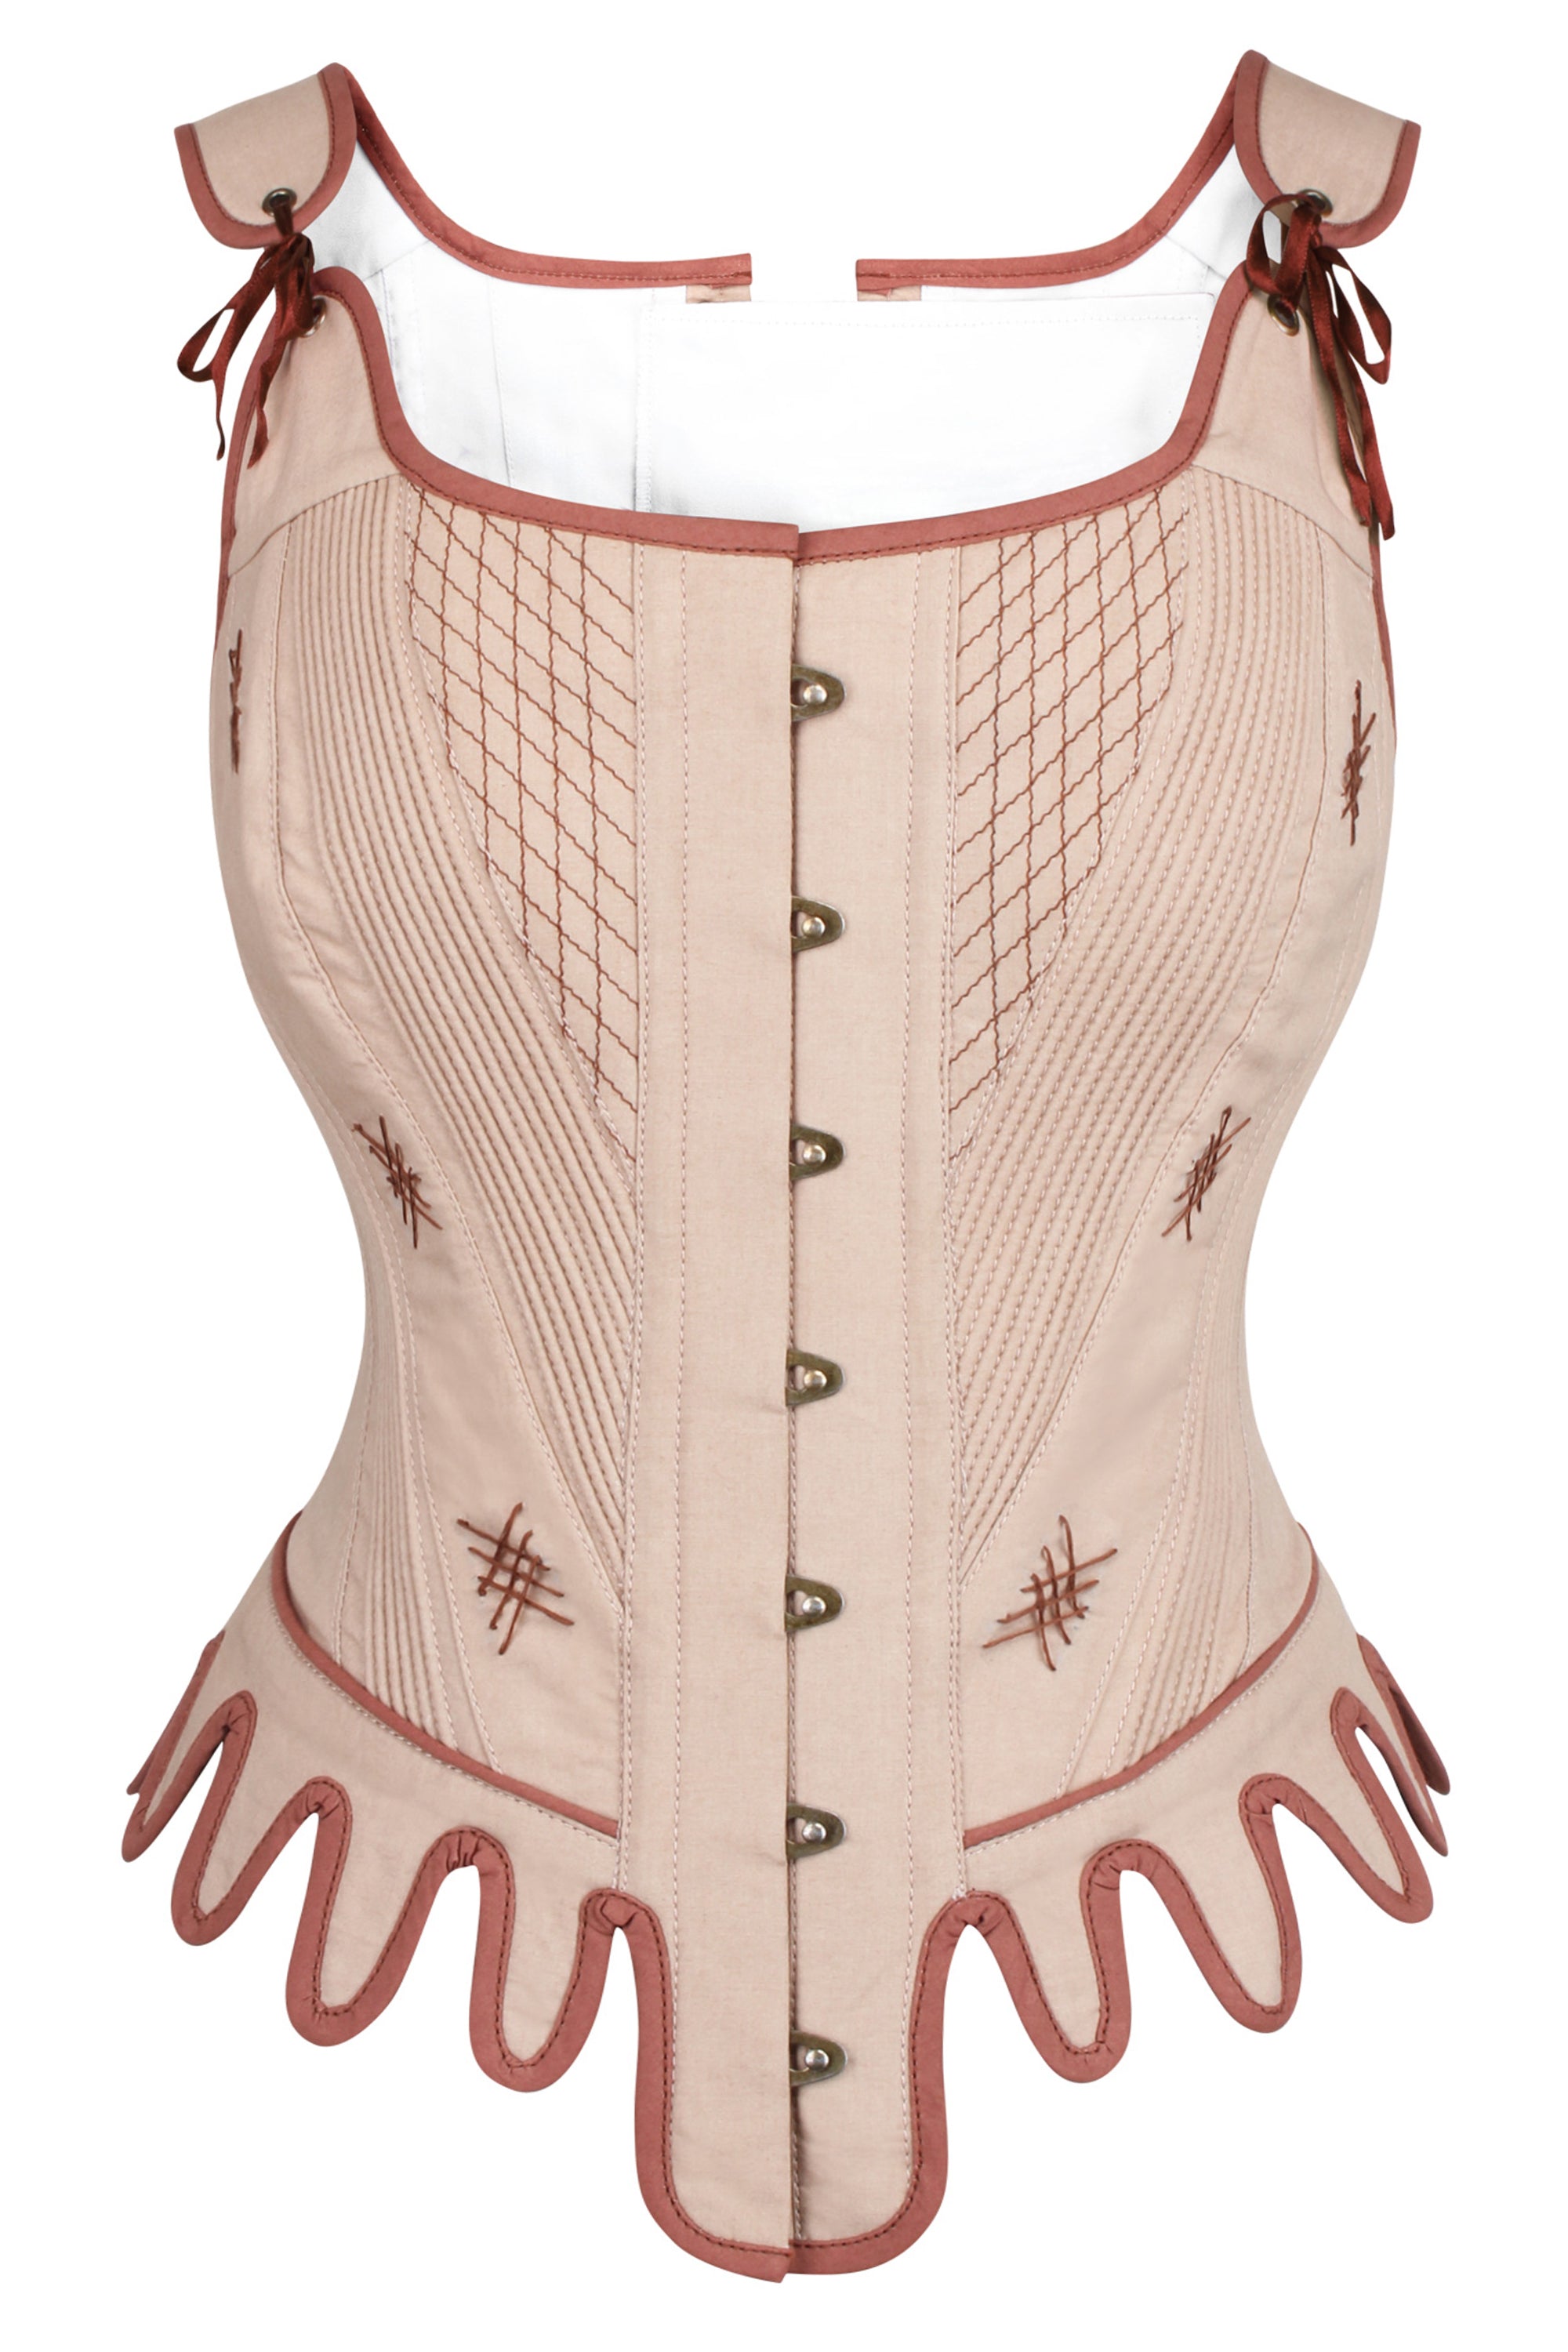 Historically Inspired Overbust Corset with Embroidery and Flossing